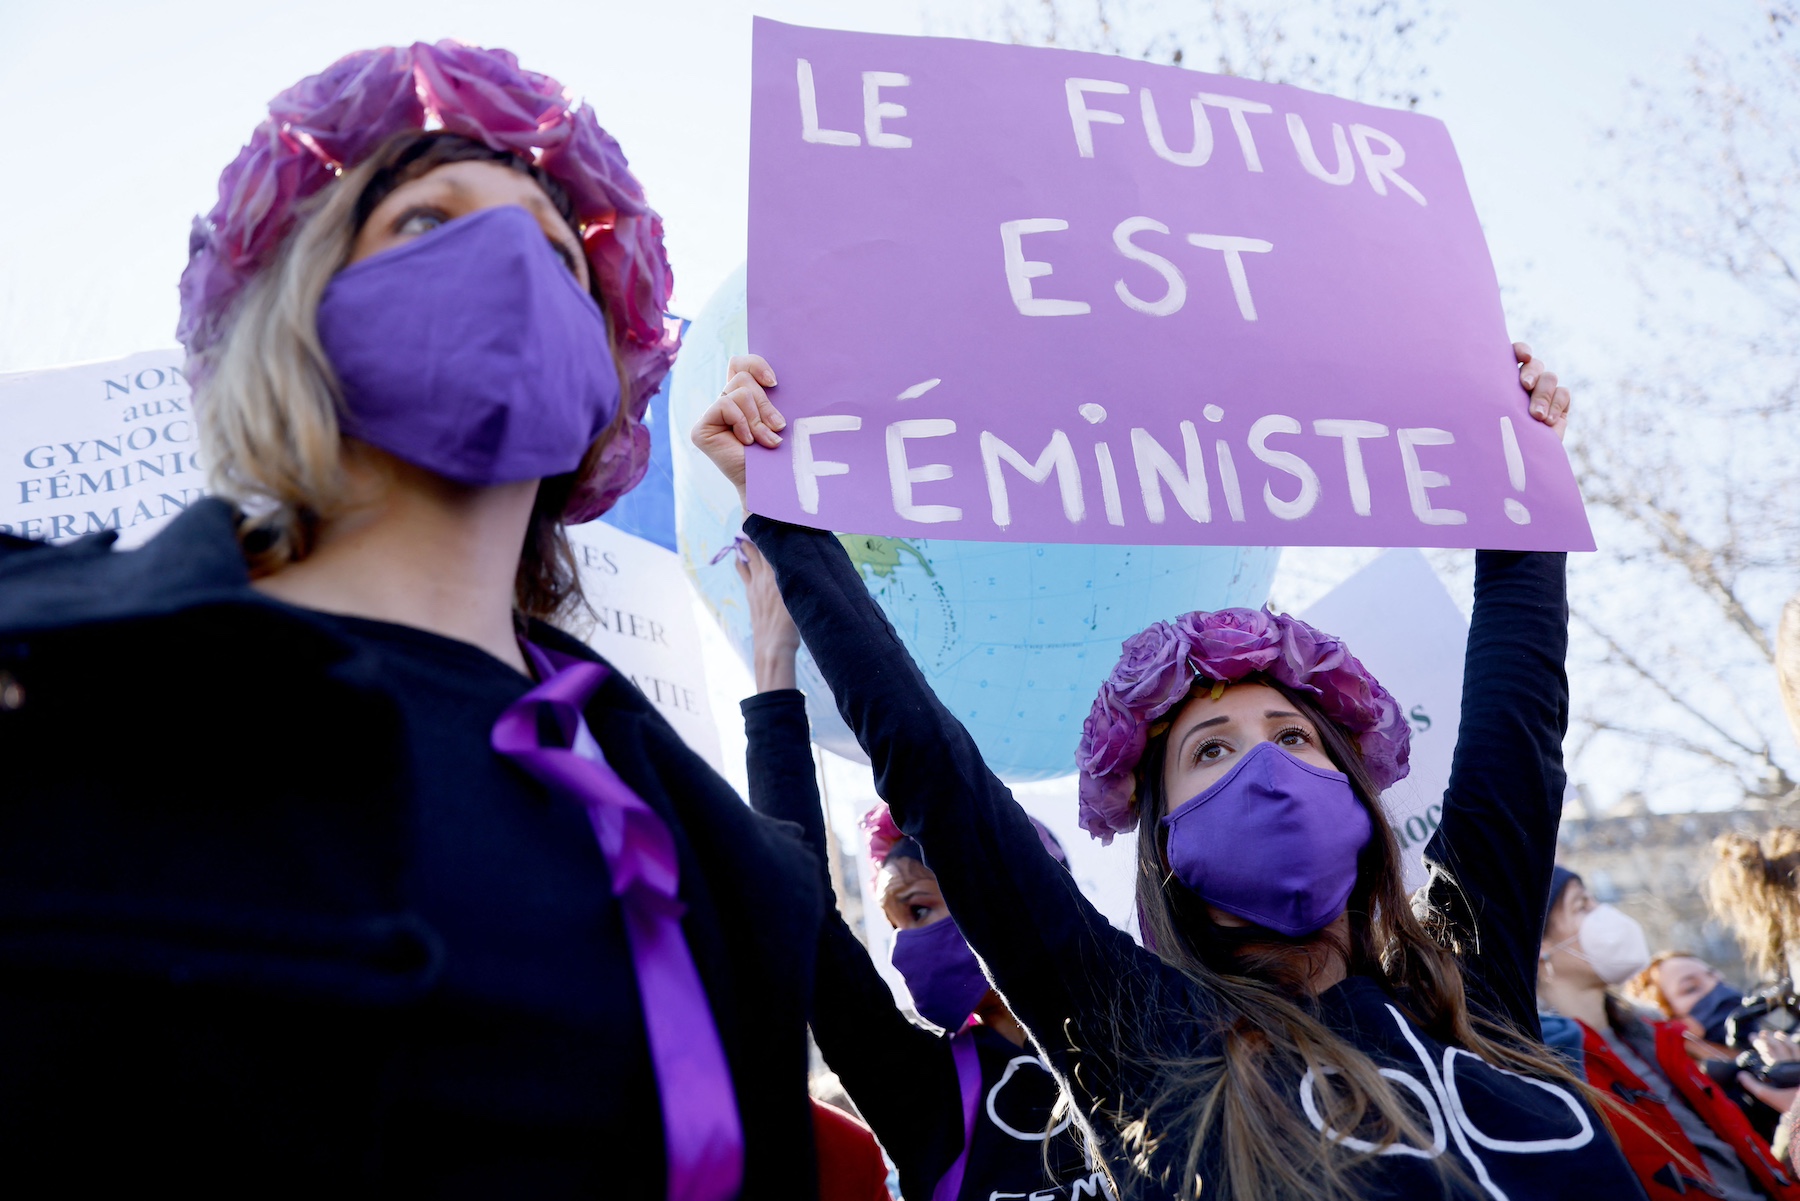 France Has Become The First Country To Make Abortion A Constitutional Right